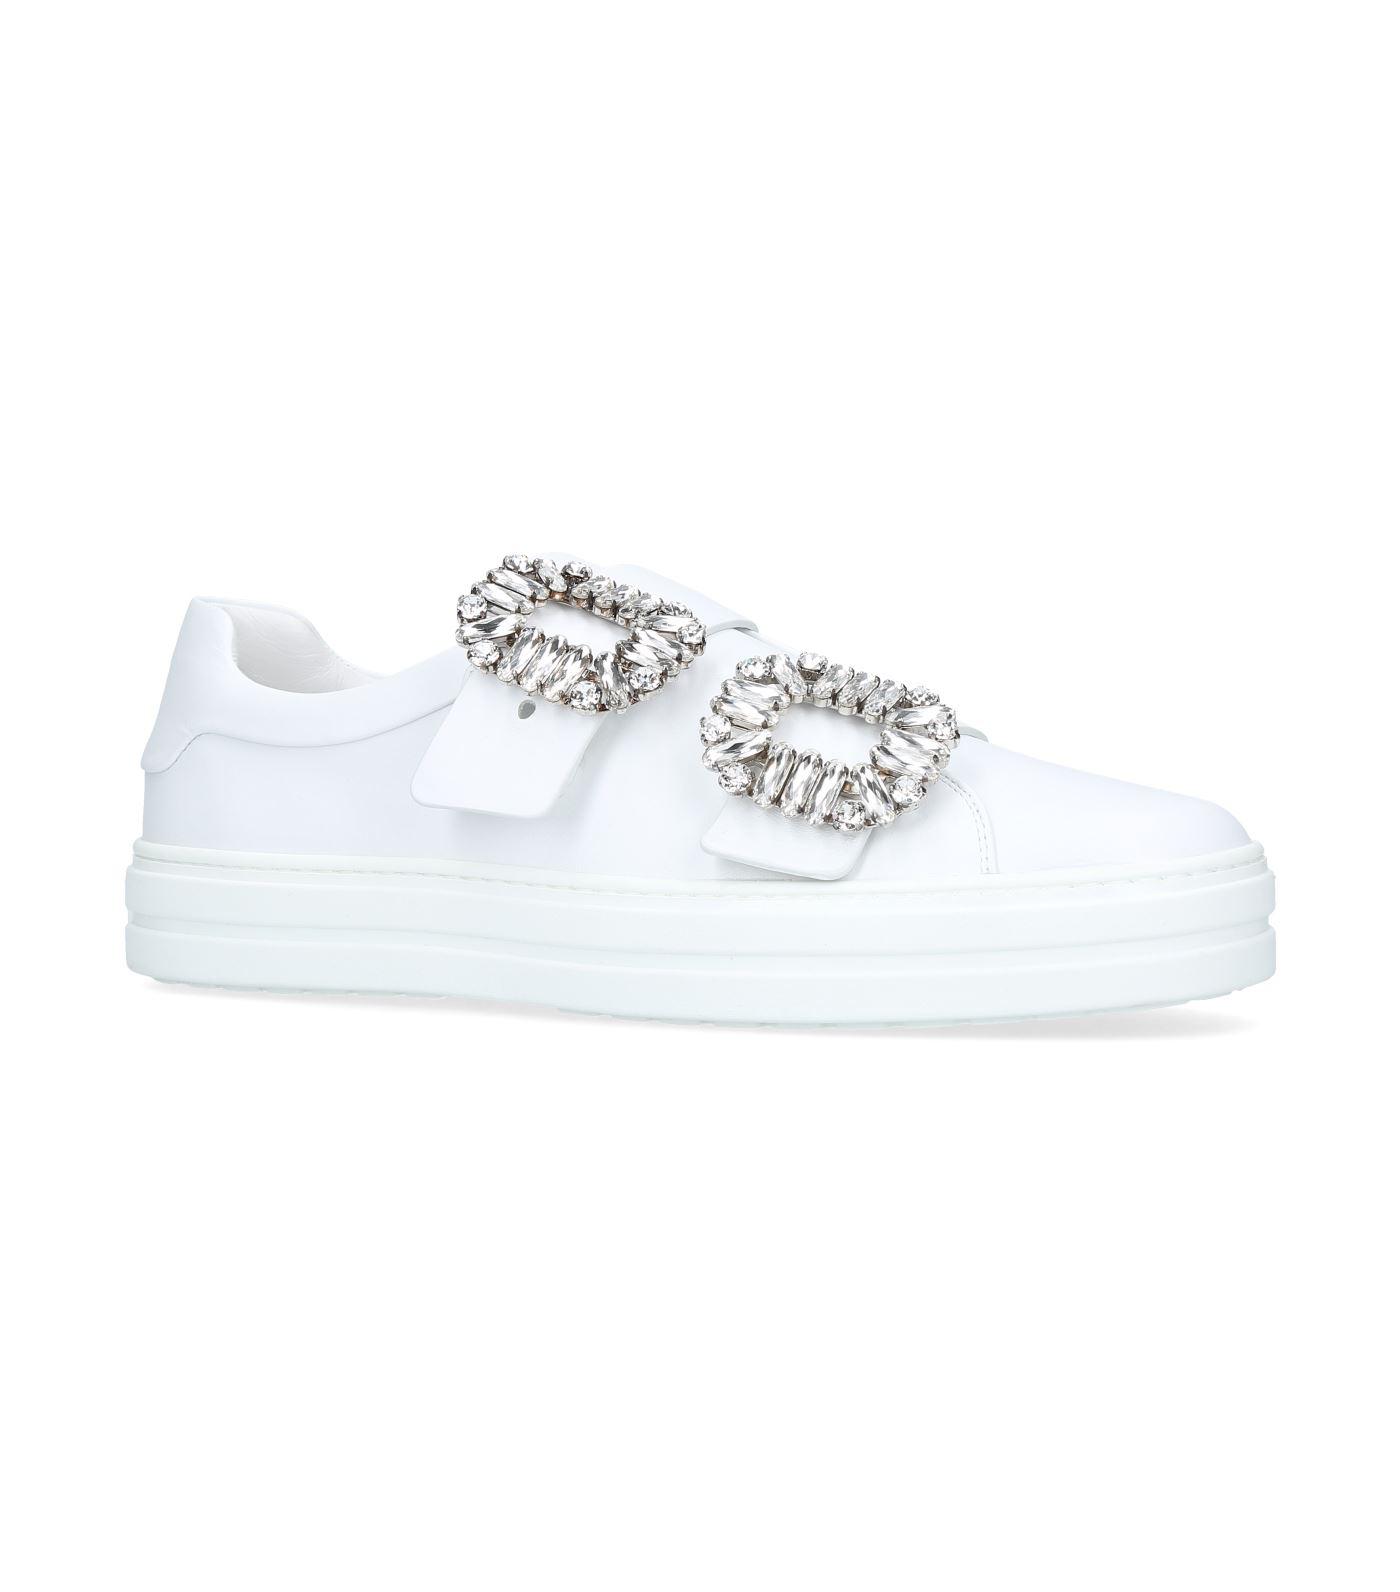 Roger Vivier Sneaky Viv Double Strass Buckle Sneakers in White | Lyst